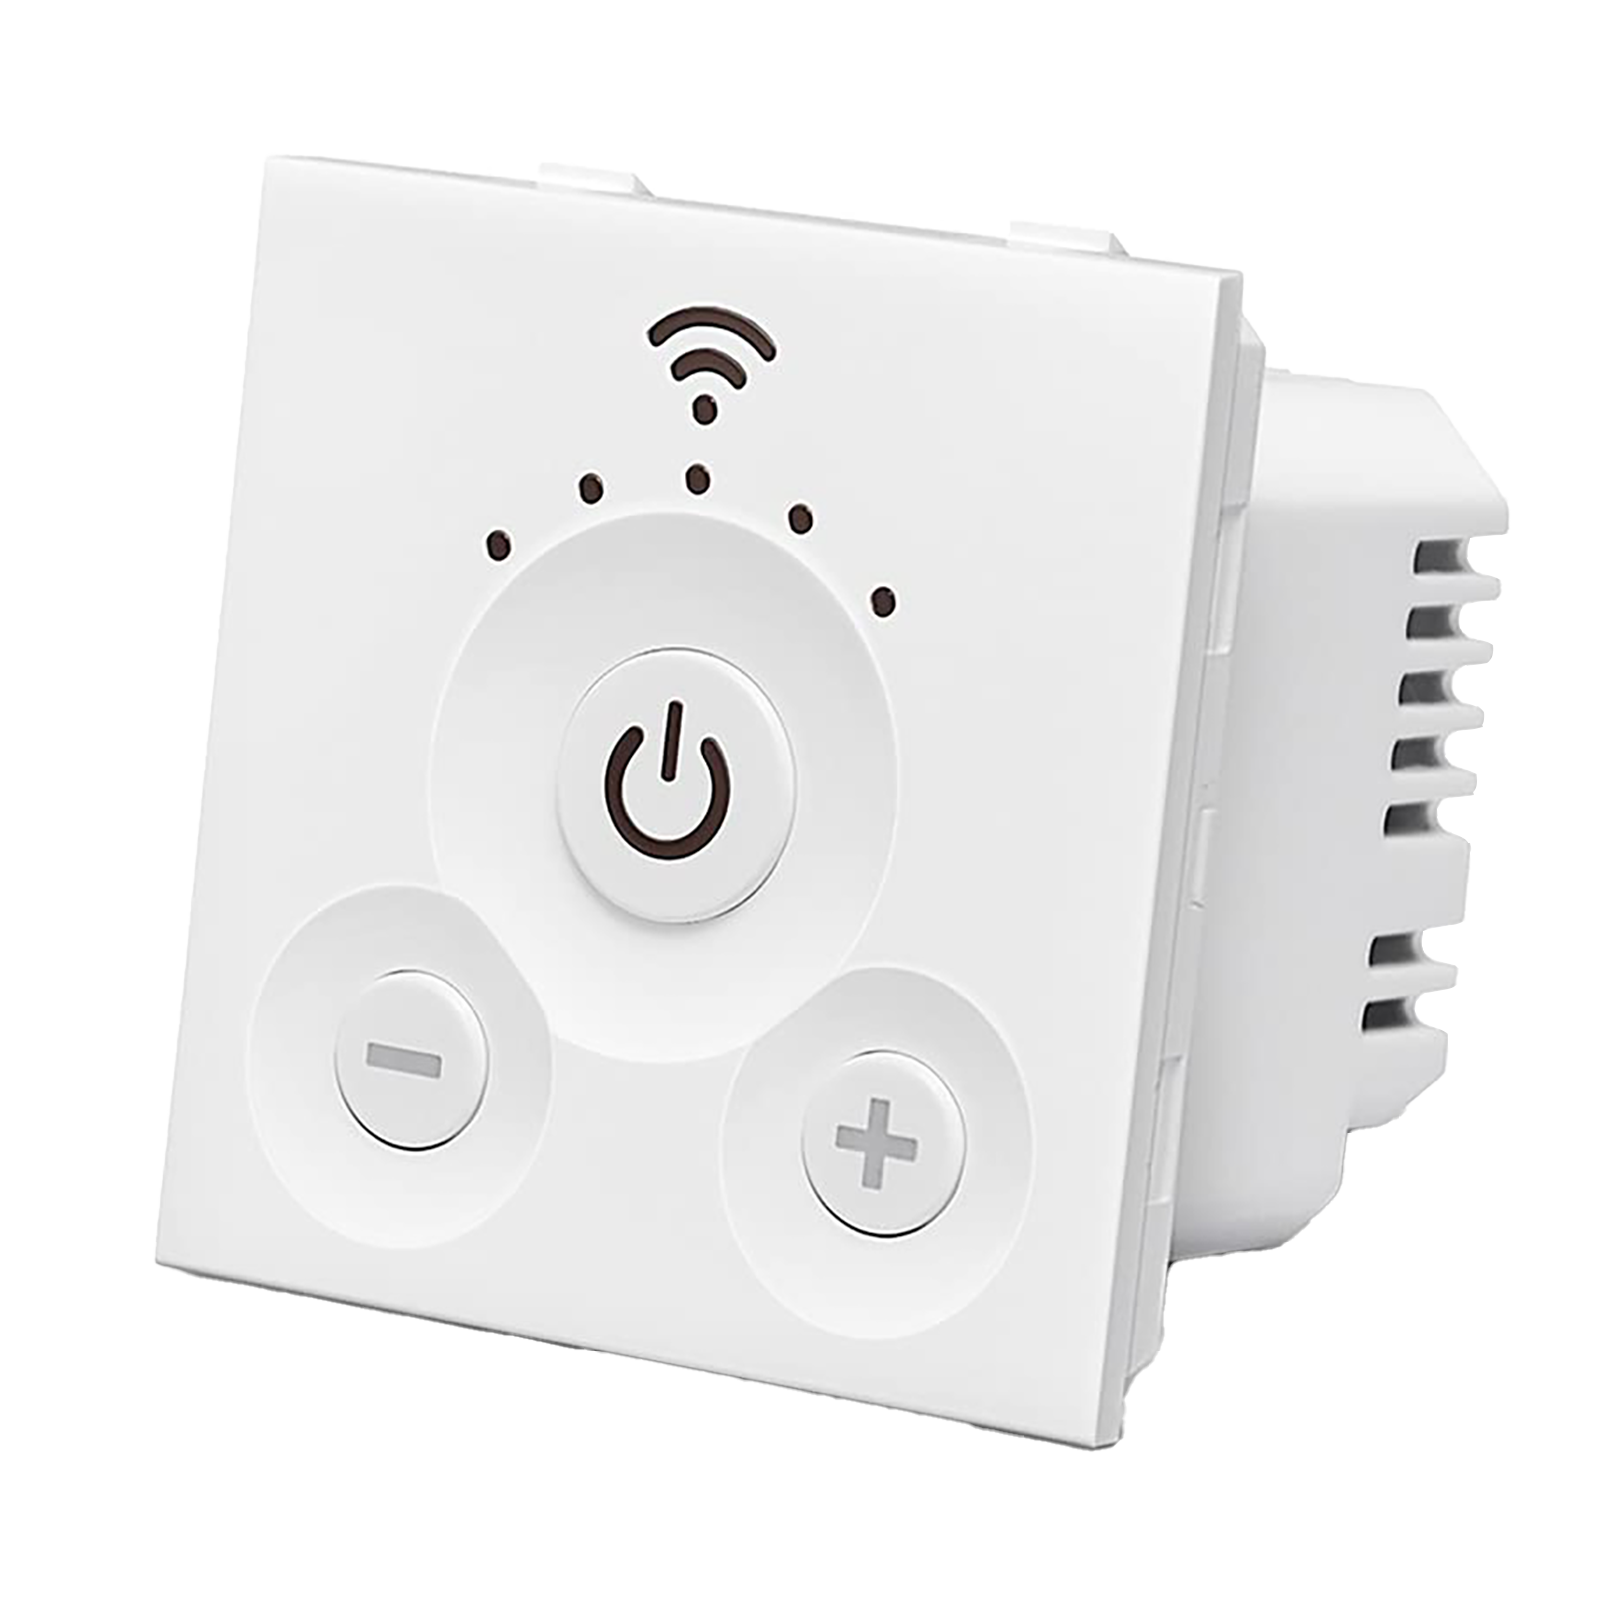 Tata Power EZ Home Smart Switch and Regulator (Google and Alexa Voice Assisted, FI-01-150 GWF-KM26, White)_1